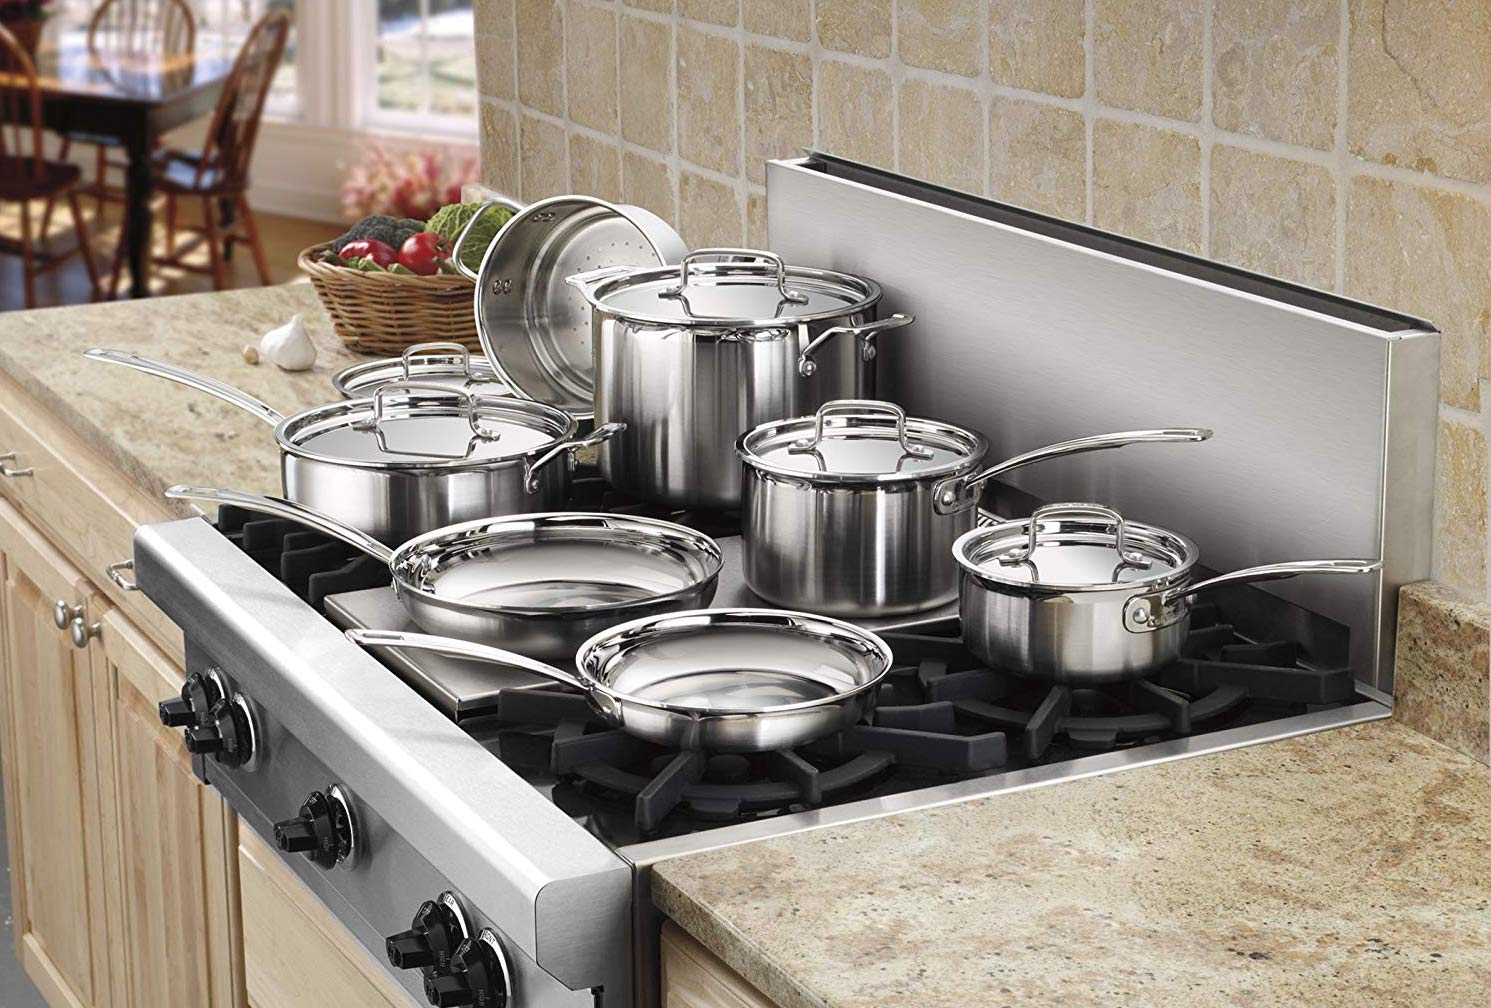 Top 10 Best Stainless Steel Cookware Sets